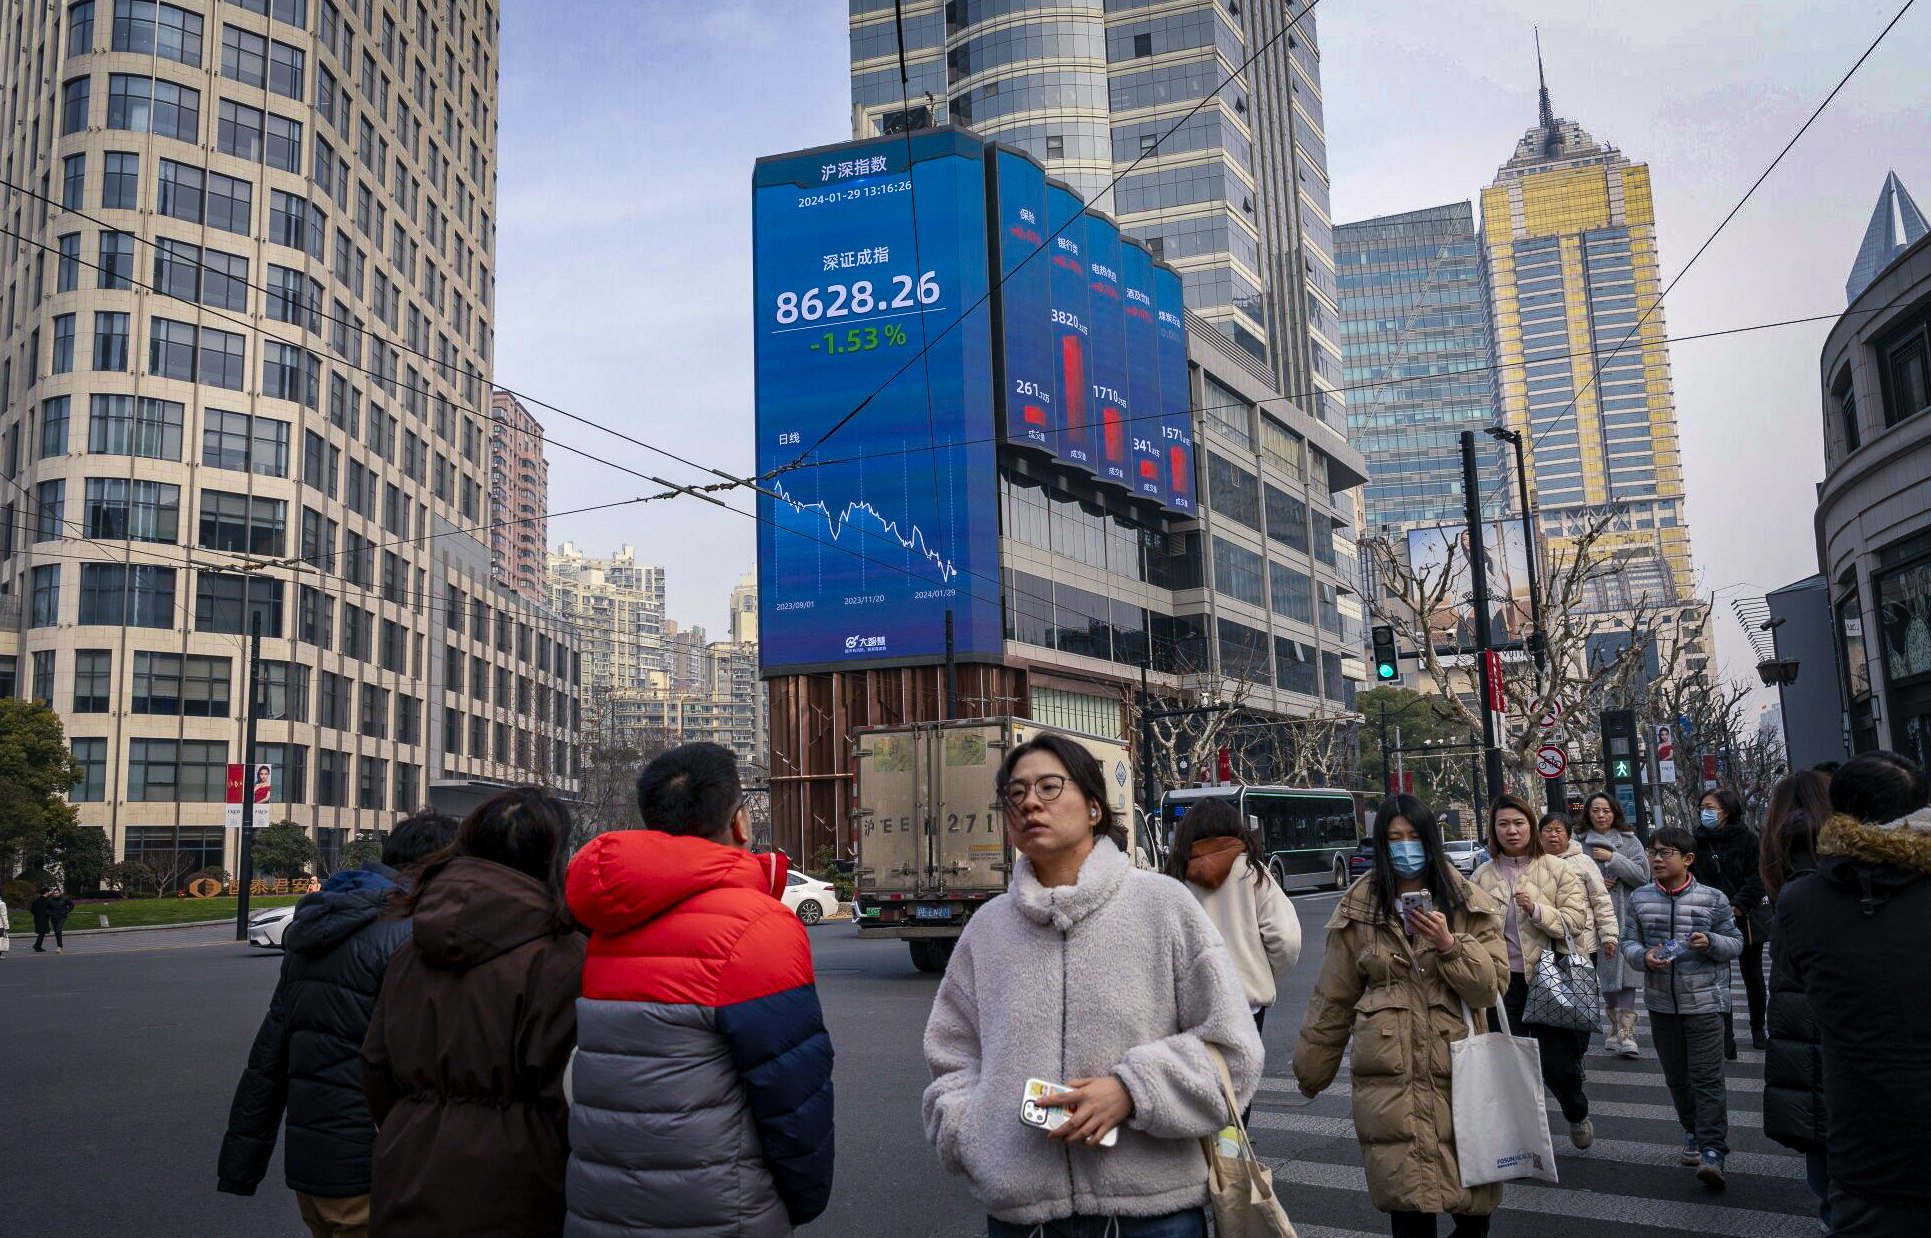 Stock figures are displayed on a screen in Shanghai on January 29. Damage to investor confidence has been colossal but the fact that mere hints of support can still trigger a dramatic rebound shows all is not lost. Photo: Bloomberg